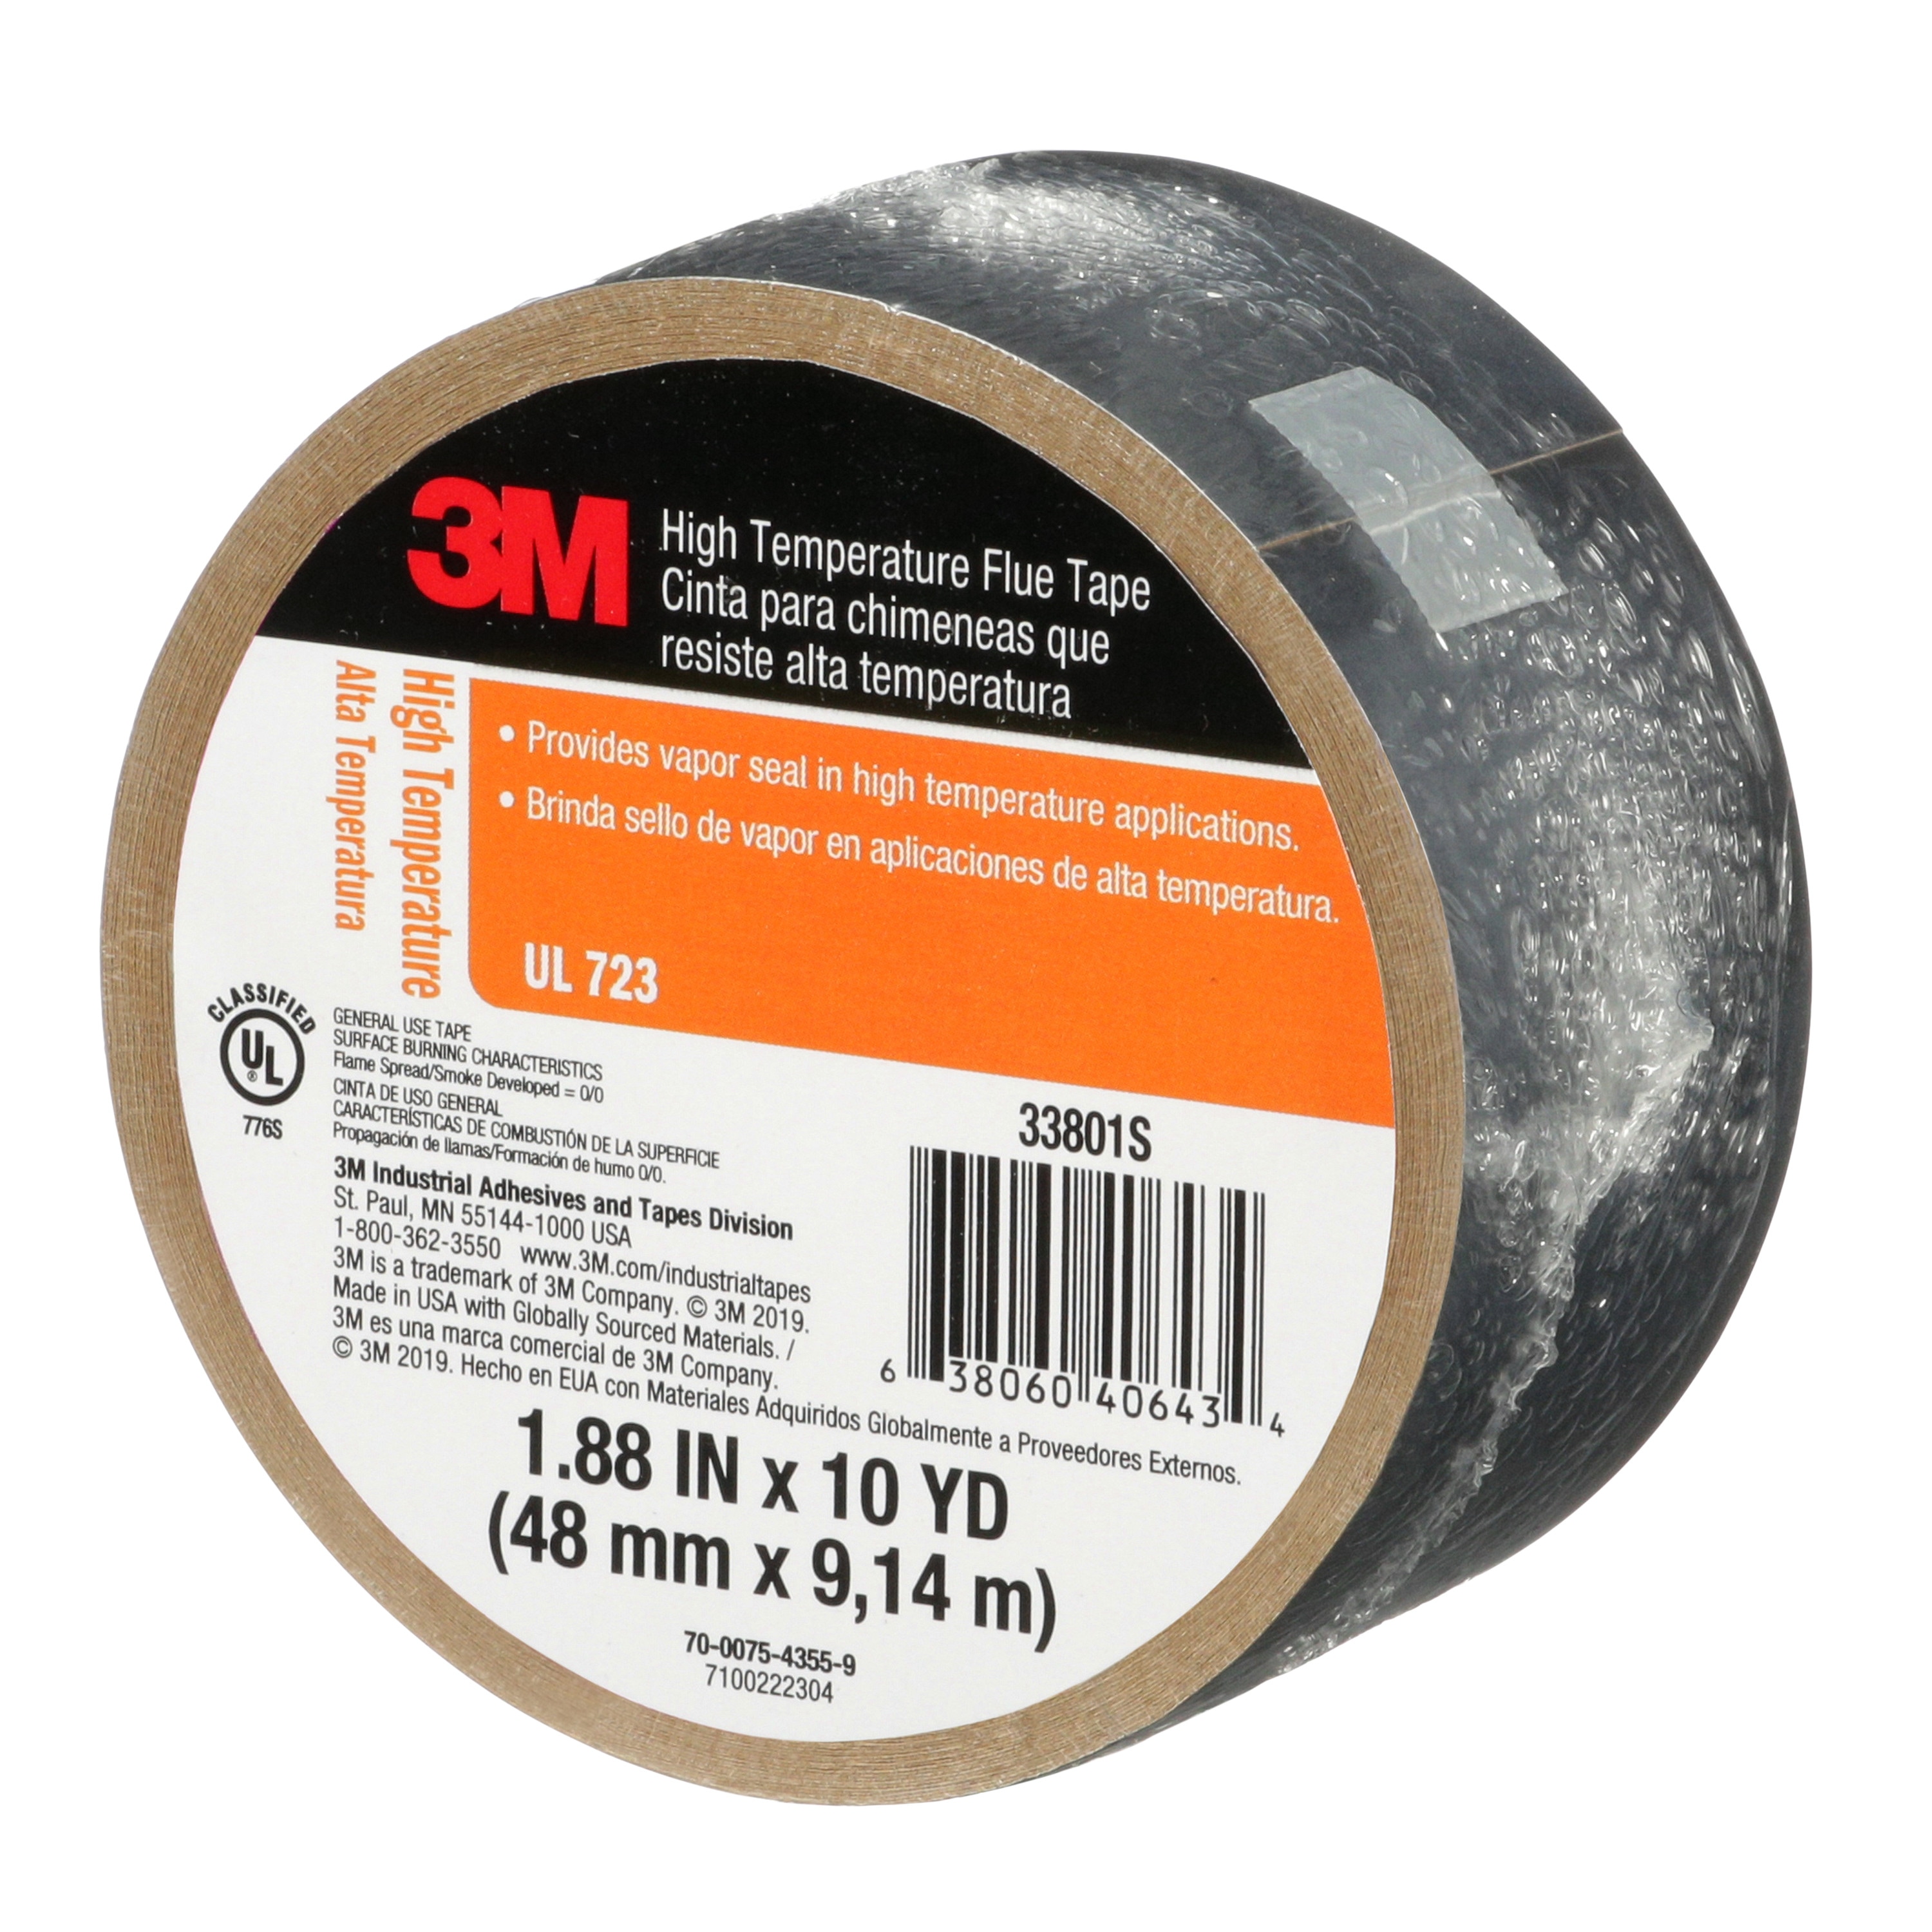 3M High Temperature Flue Tape High Heat Sealing Tape up to 600 degrees 15-Foo... 